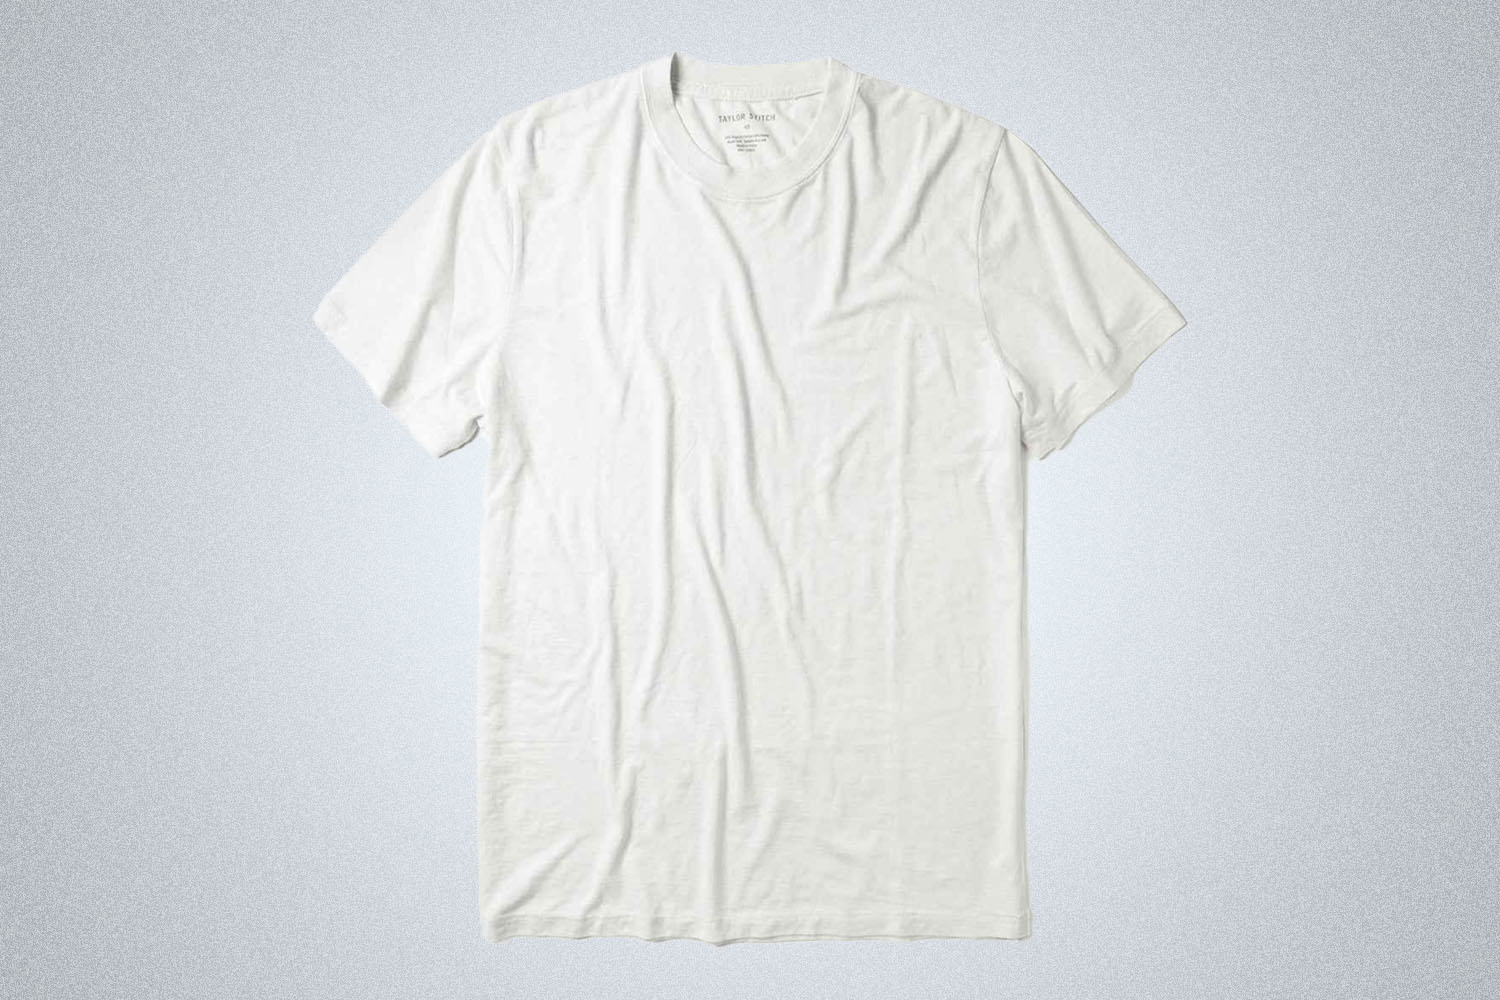 a white cotton-hemp short sleeve tee shirt from Taylor Stitch on a grey background